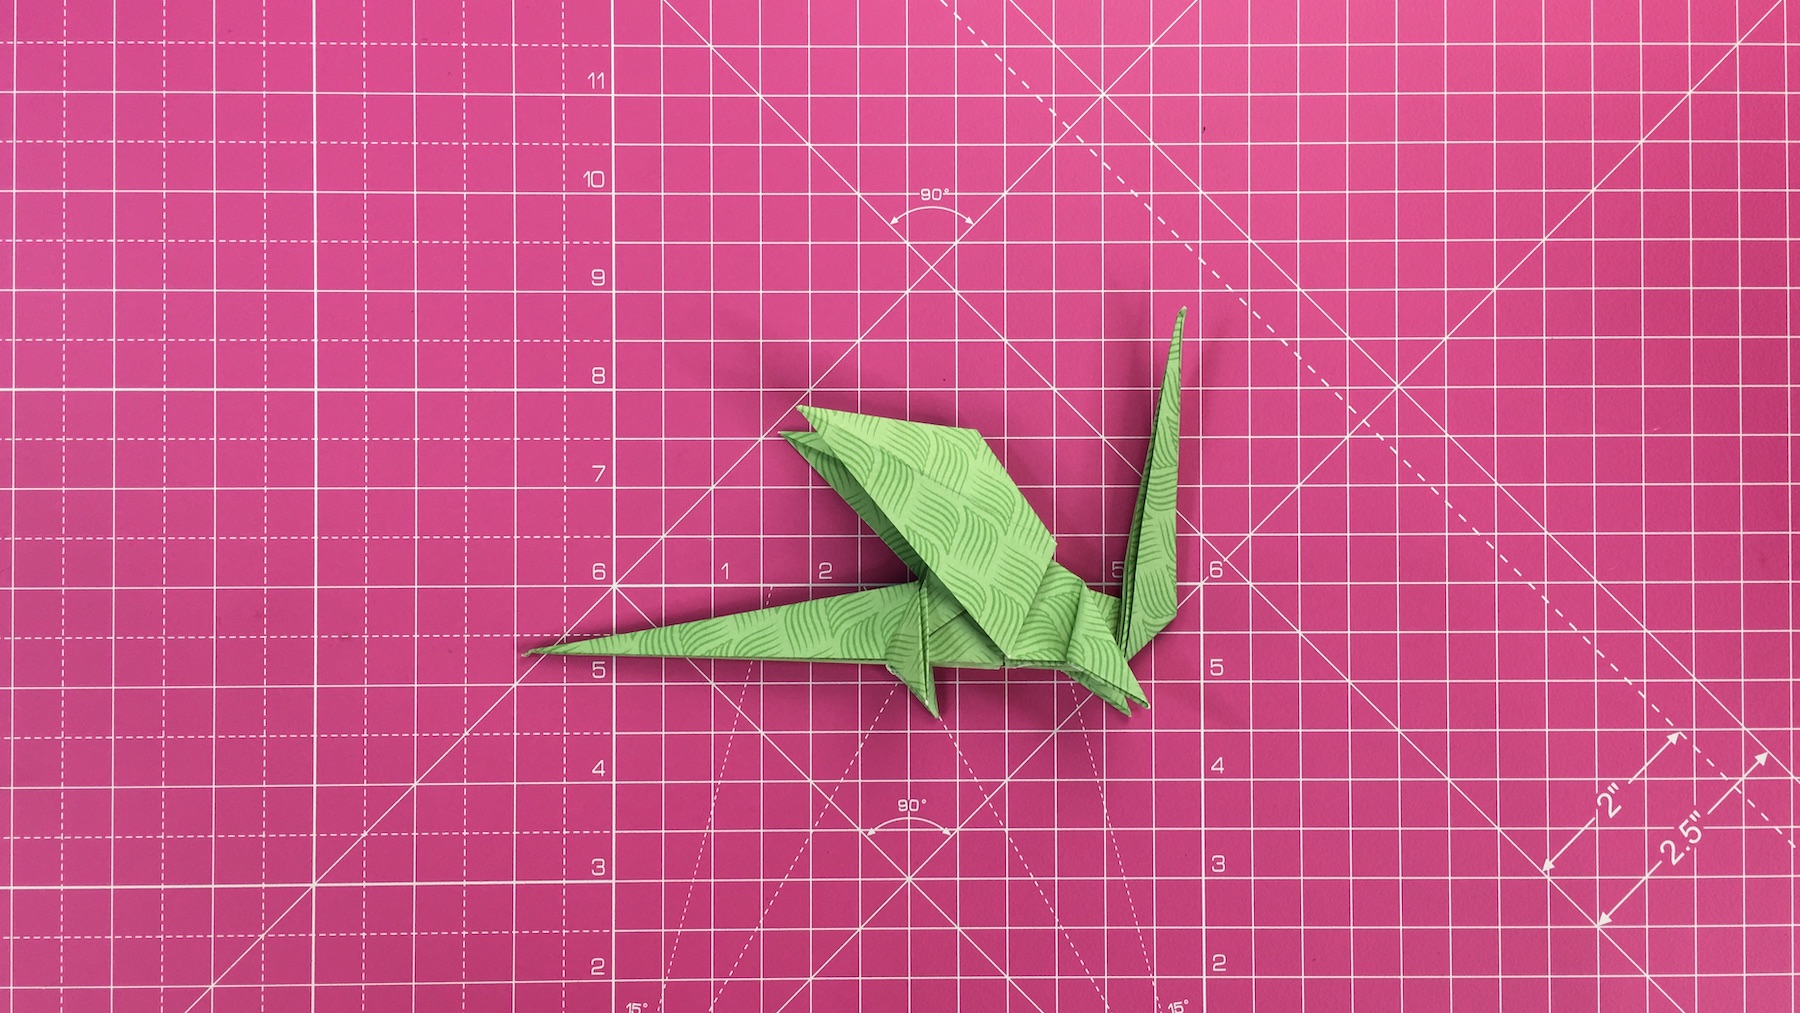 How to make an origami dragon, origami dragon tutorial - step 47